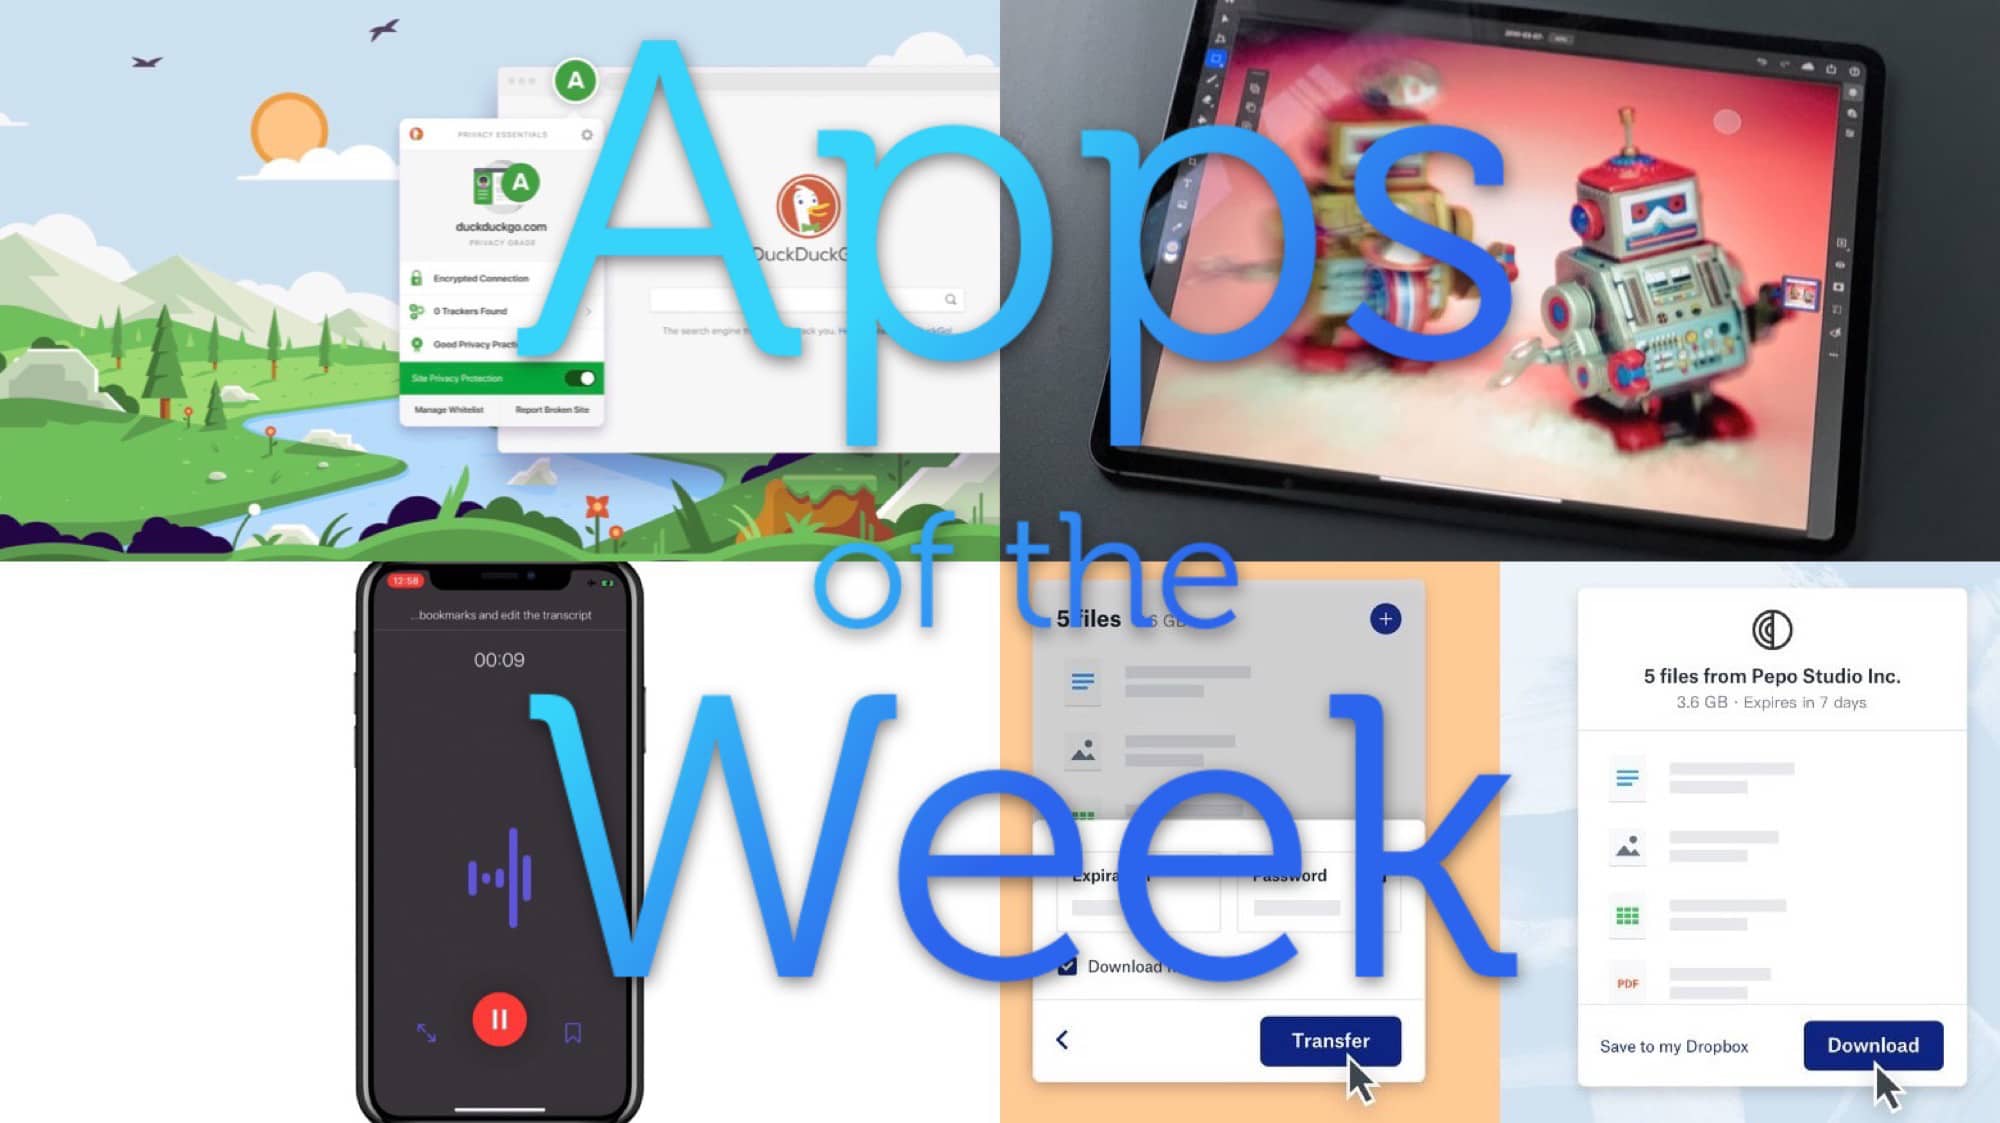 Treat yourself to this week's best new apps.